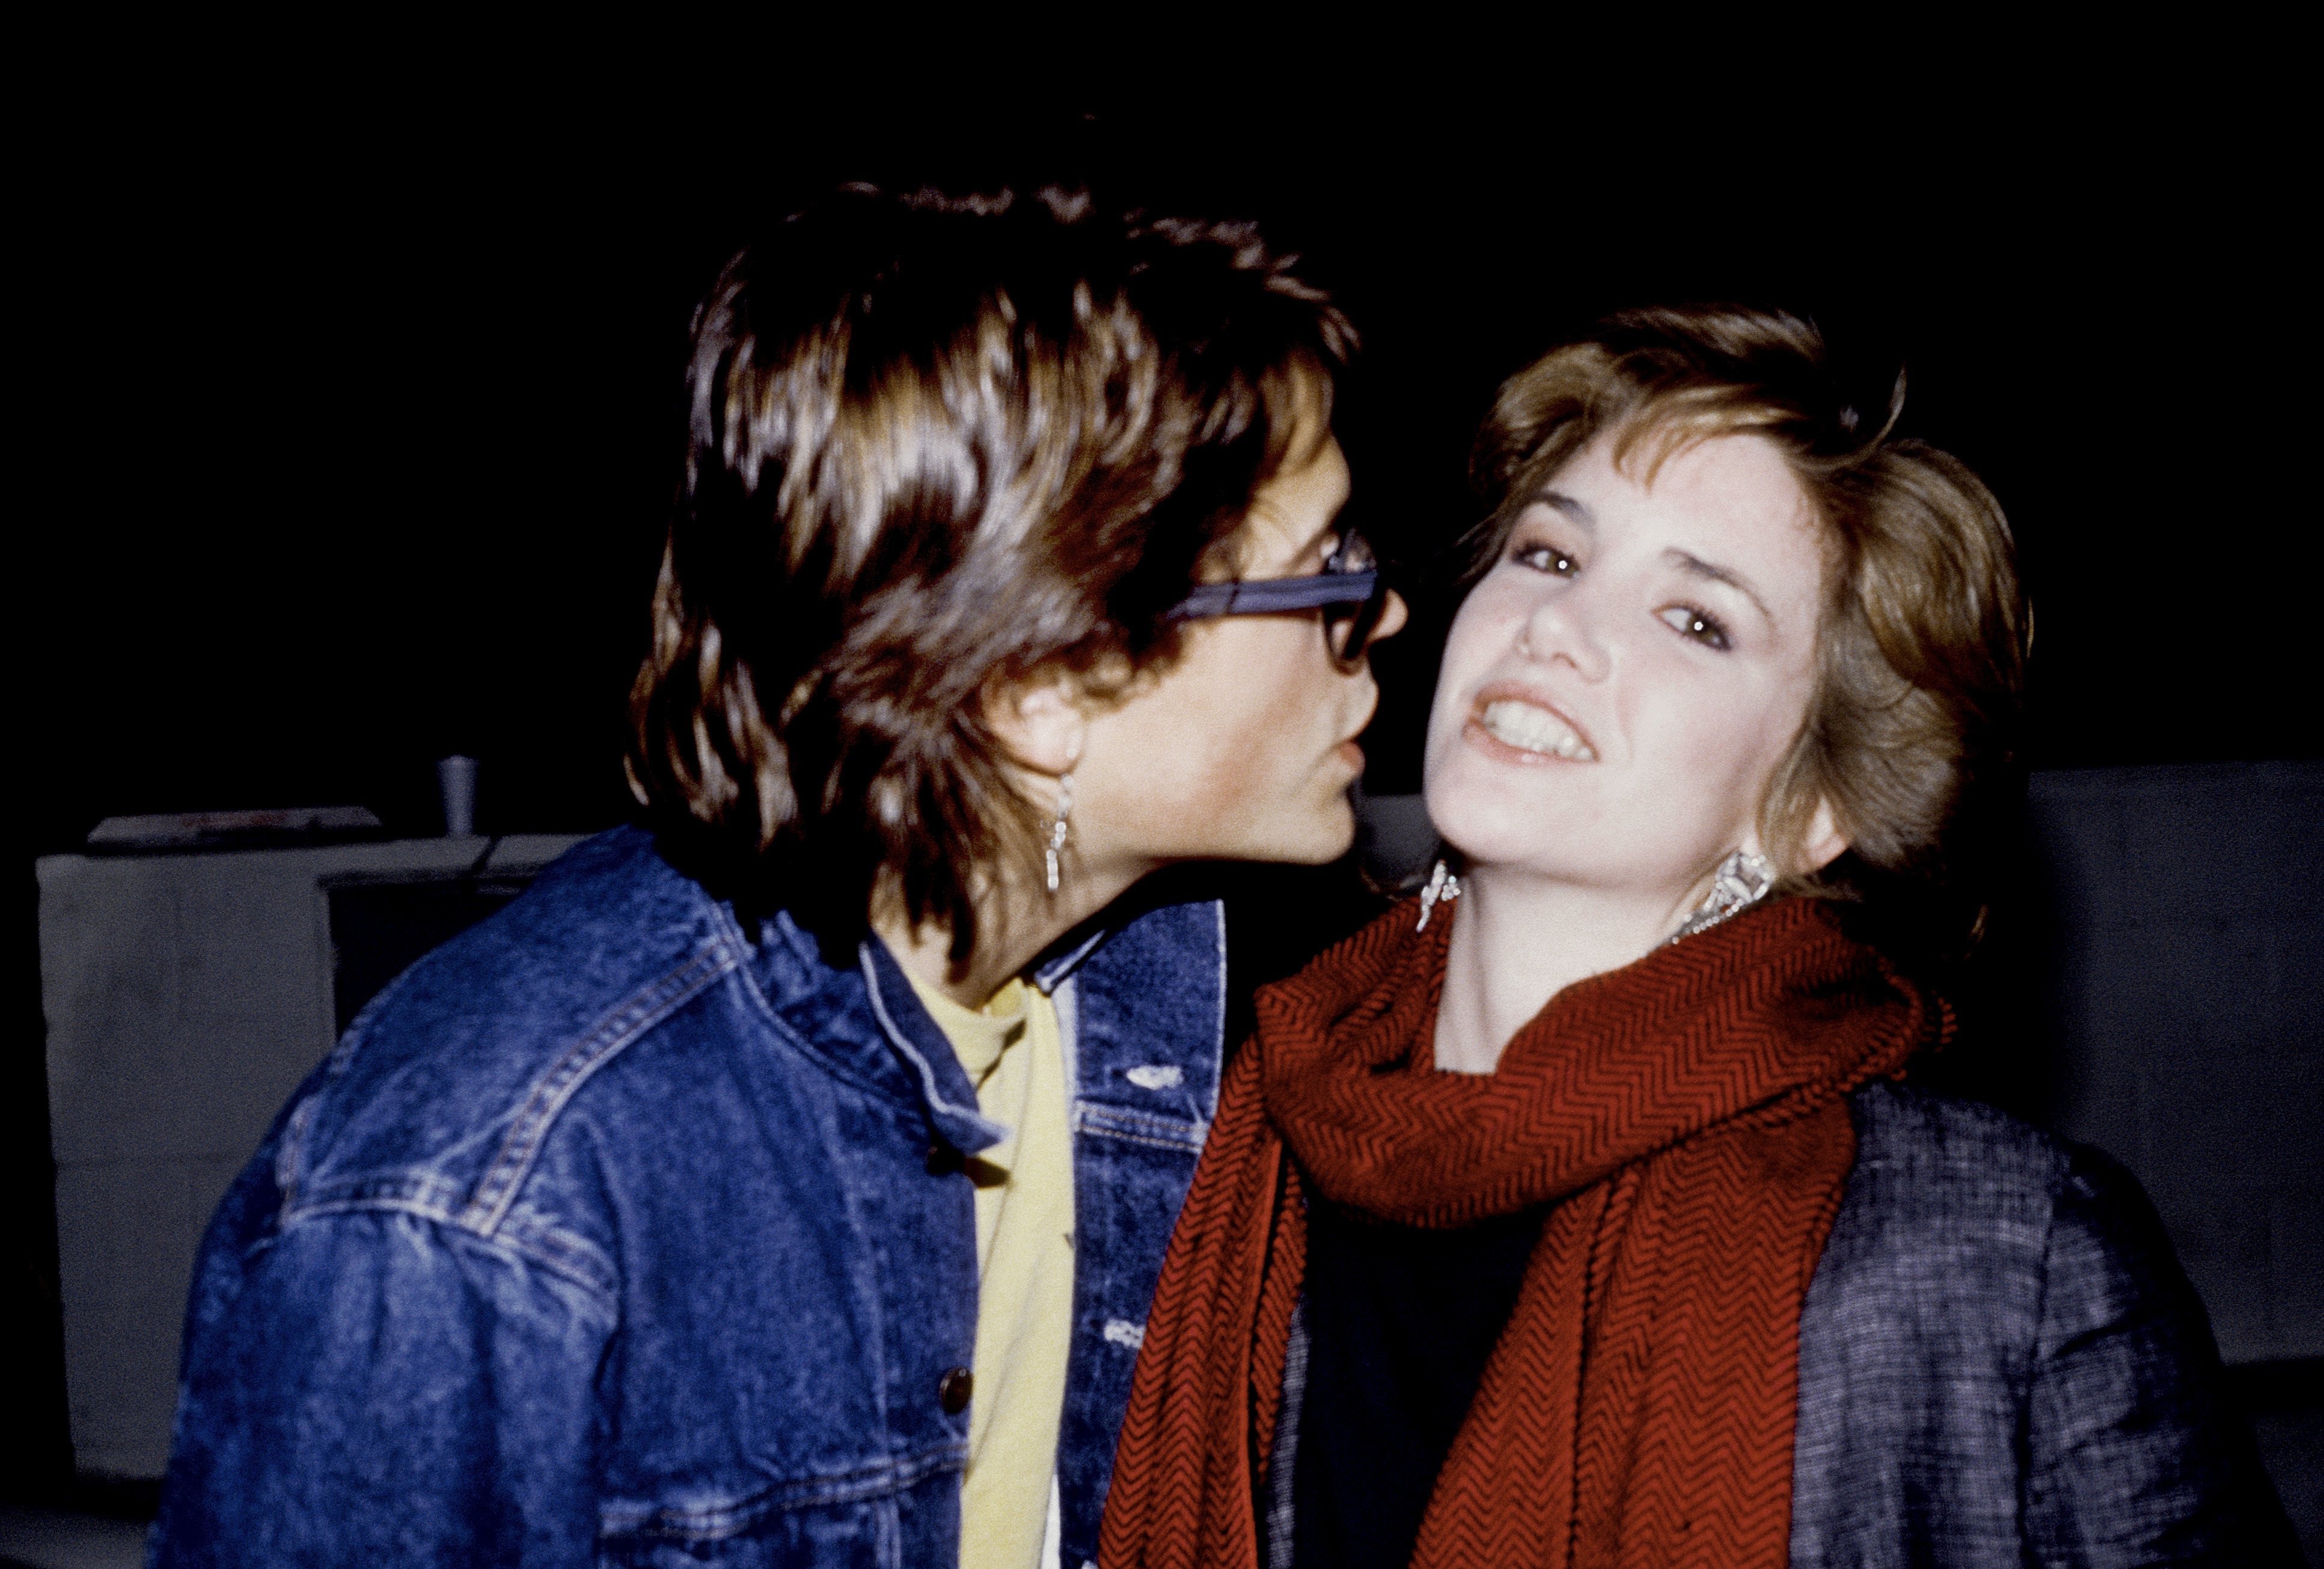 Lowe and Gilbert at an event in circa 1985 in Los Angeles, California. | Source: Getty Images